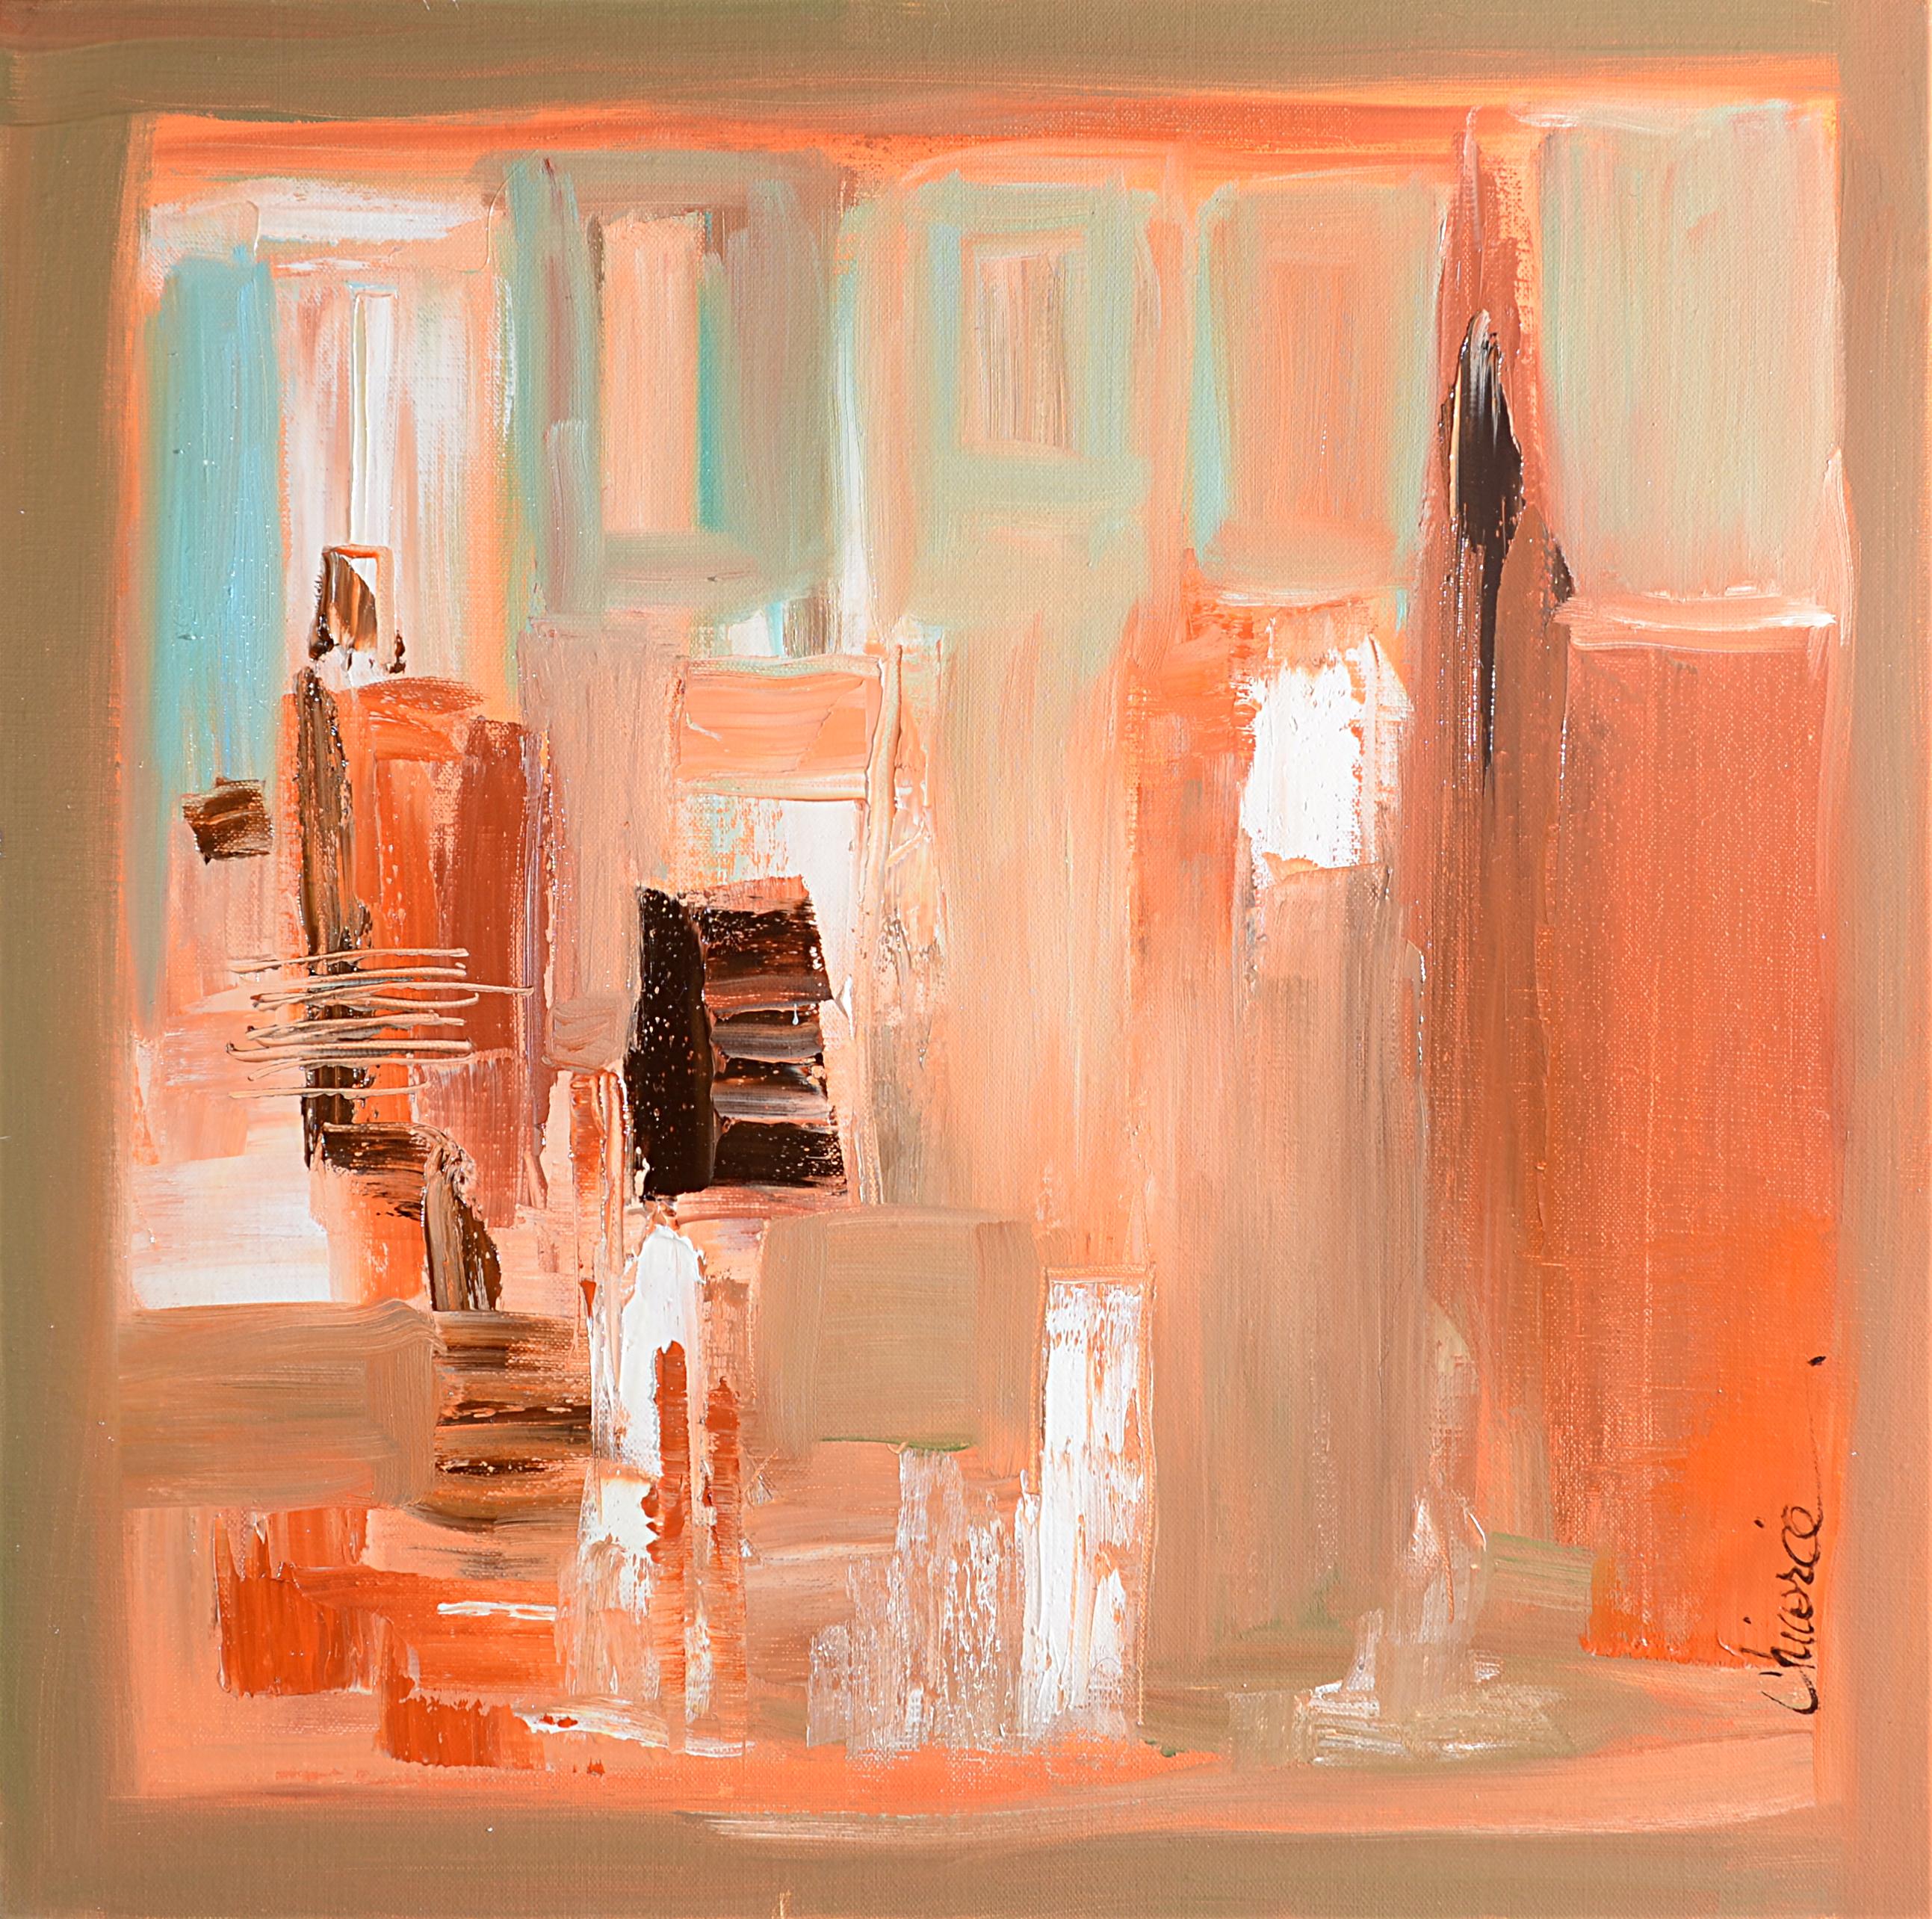 Chicorée Abstract Painting – "Studio n° 1", Light Brown and Orange Red Abstract Interior Squared Oil Painting